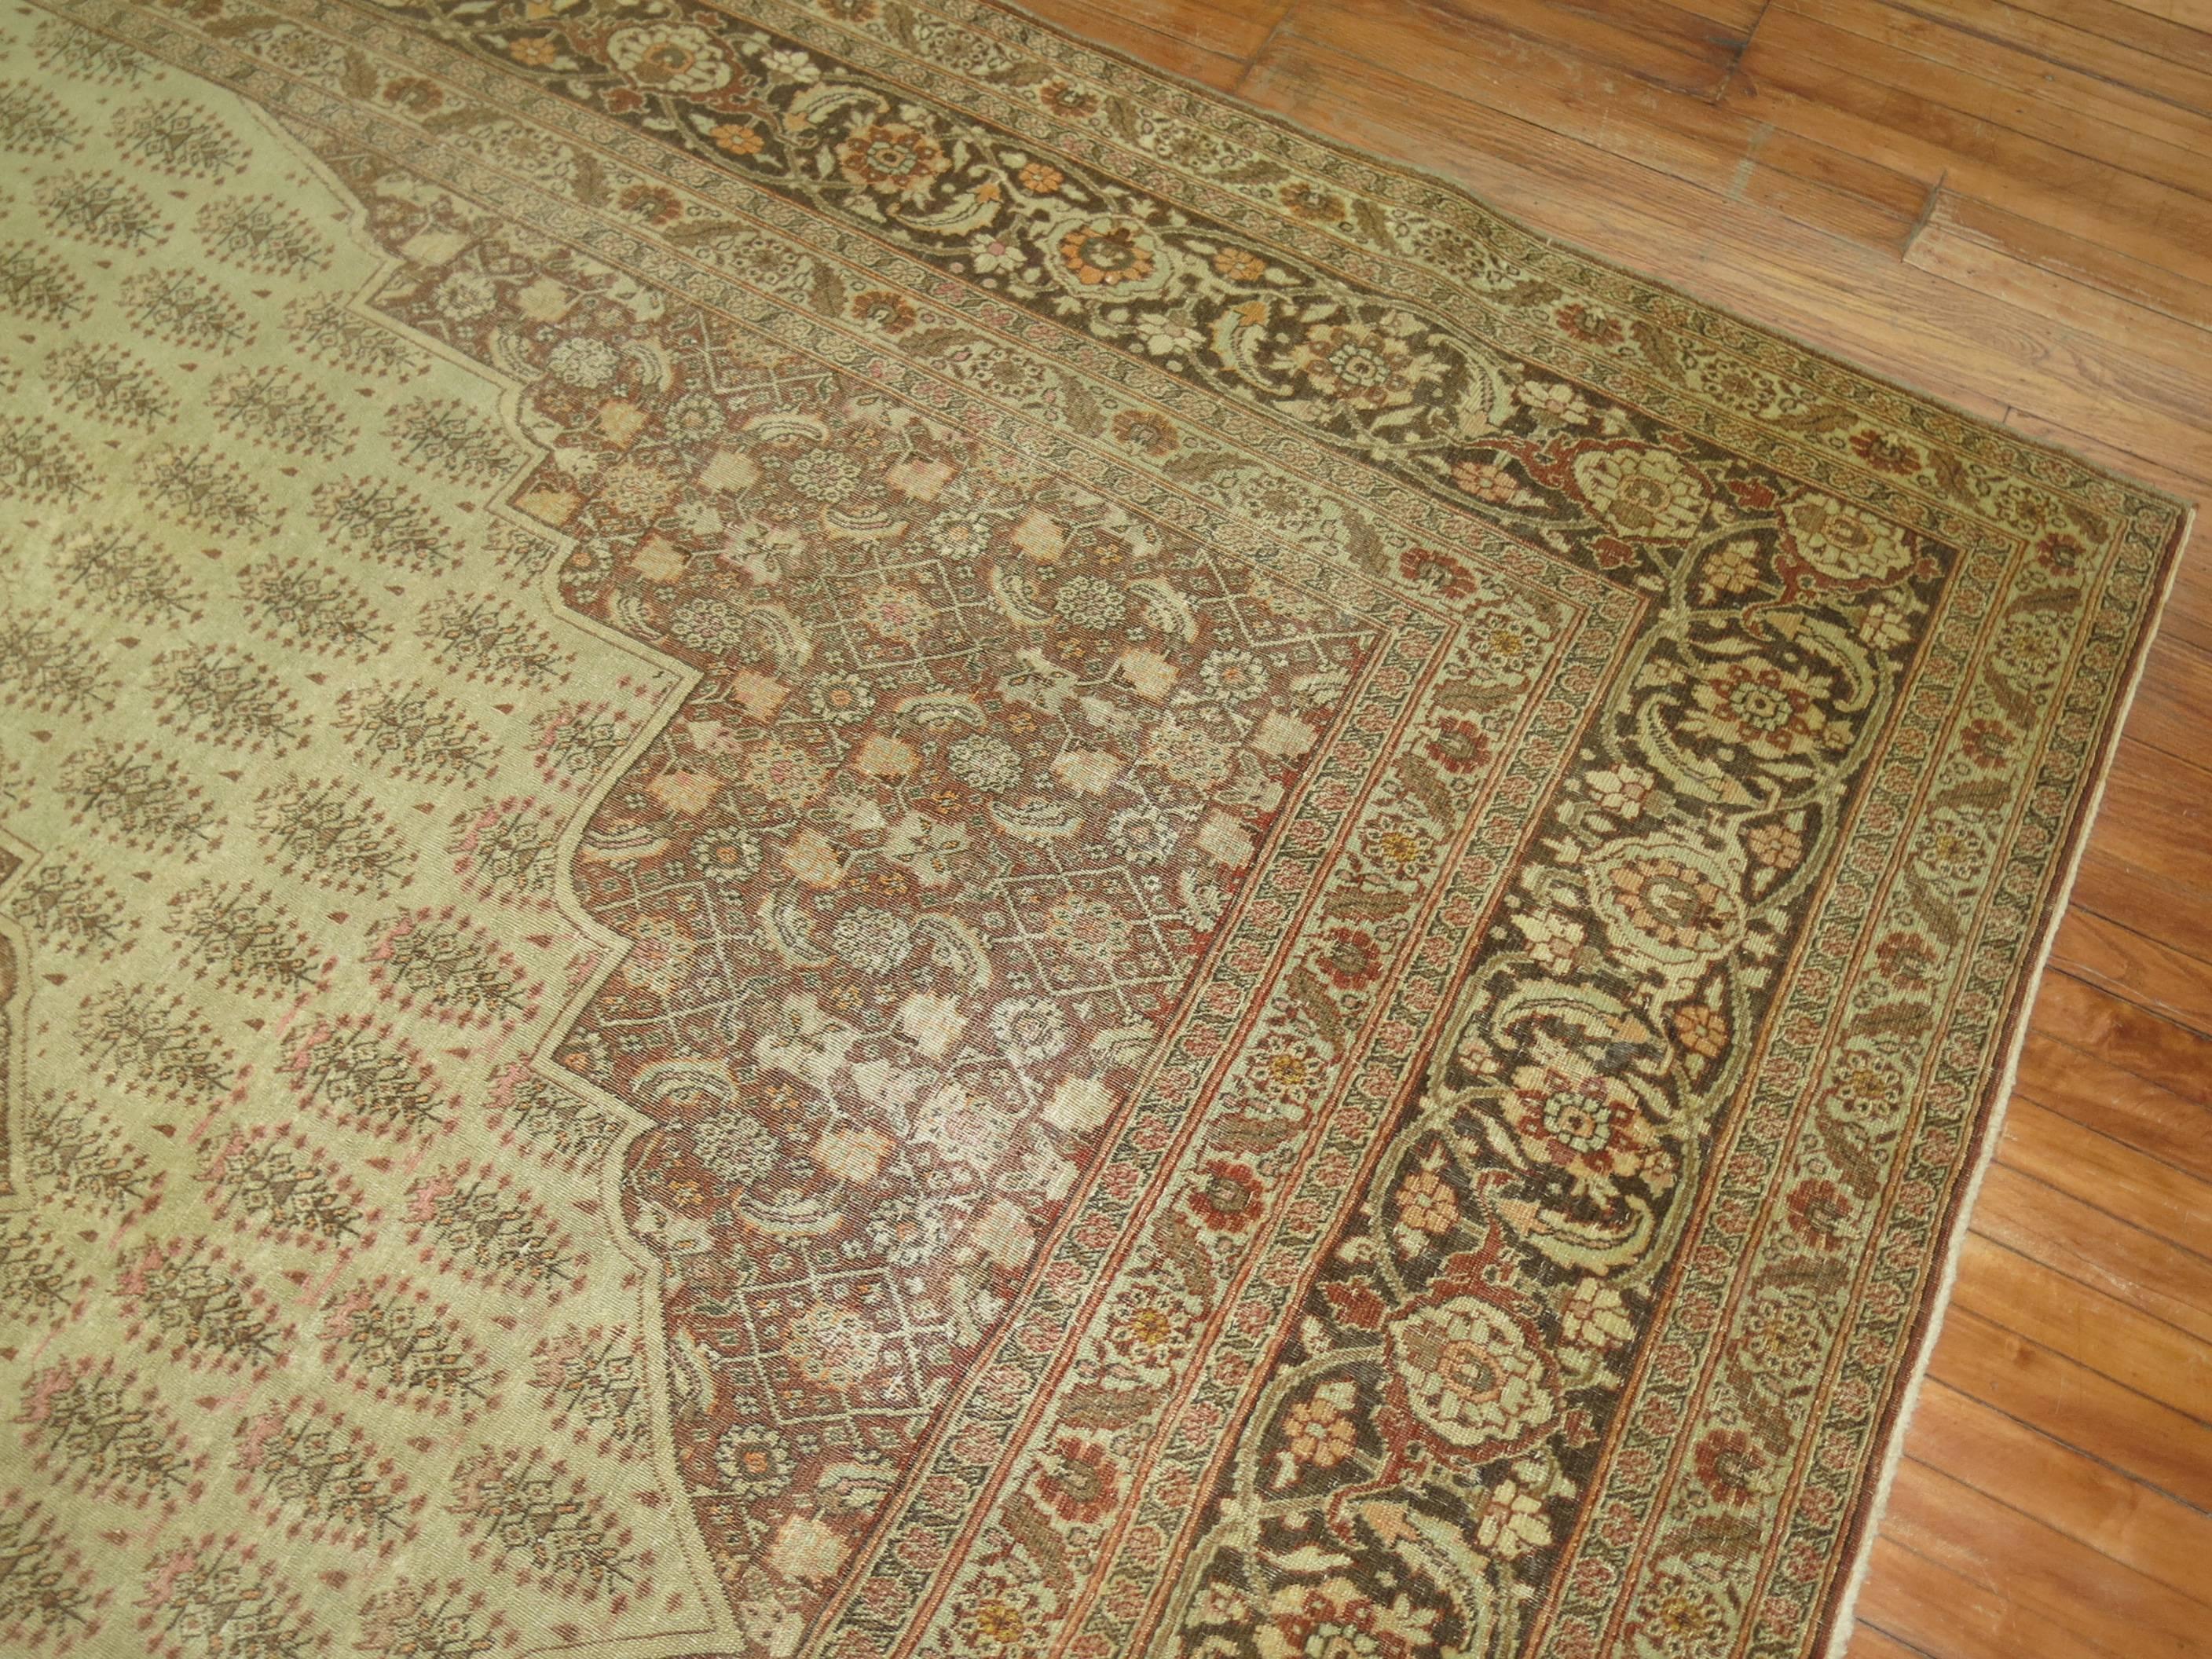 An early 20th century Persian Tabriz rug in predominant shades of brown and beige,

circa 1920. Measures: 9'1